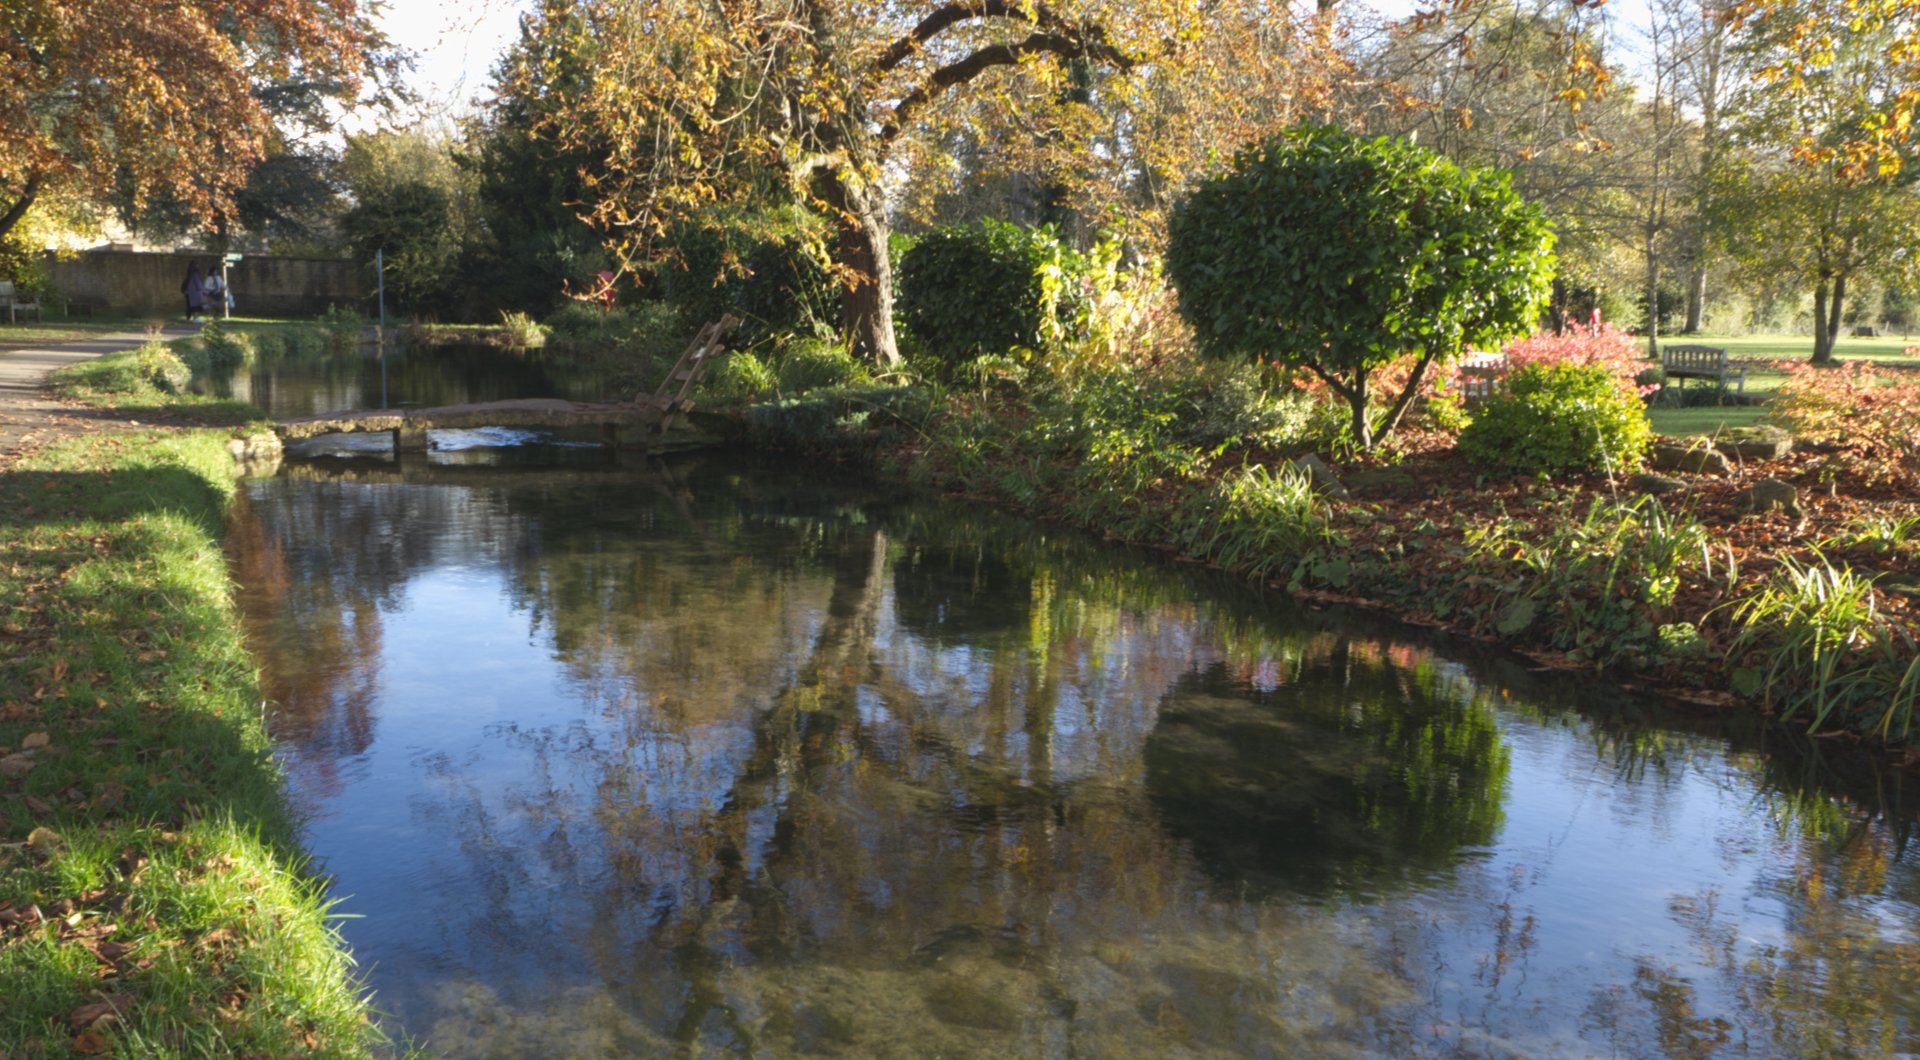 Lower Slaughter Reflections by Colin Pascoe